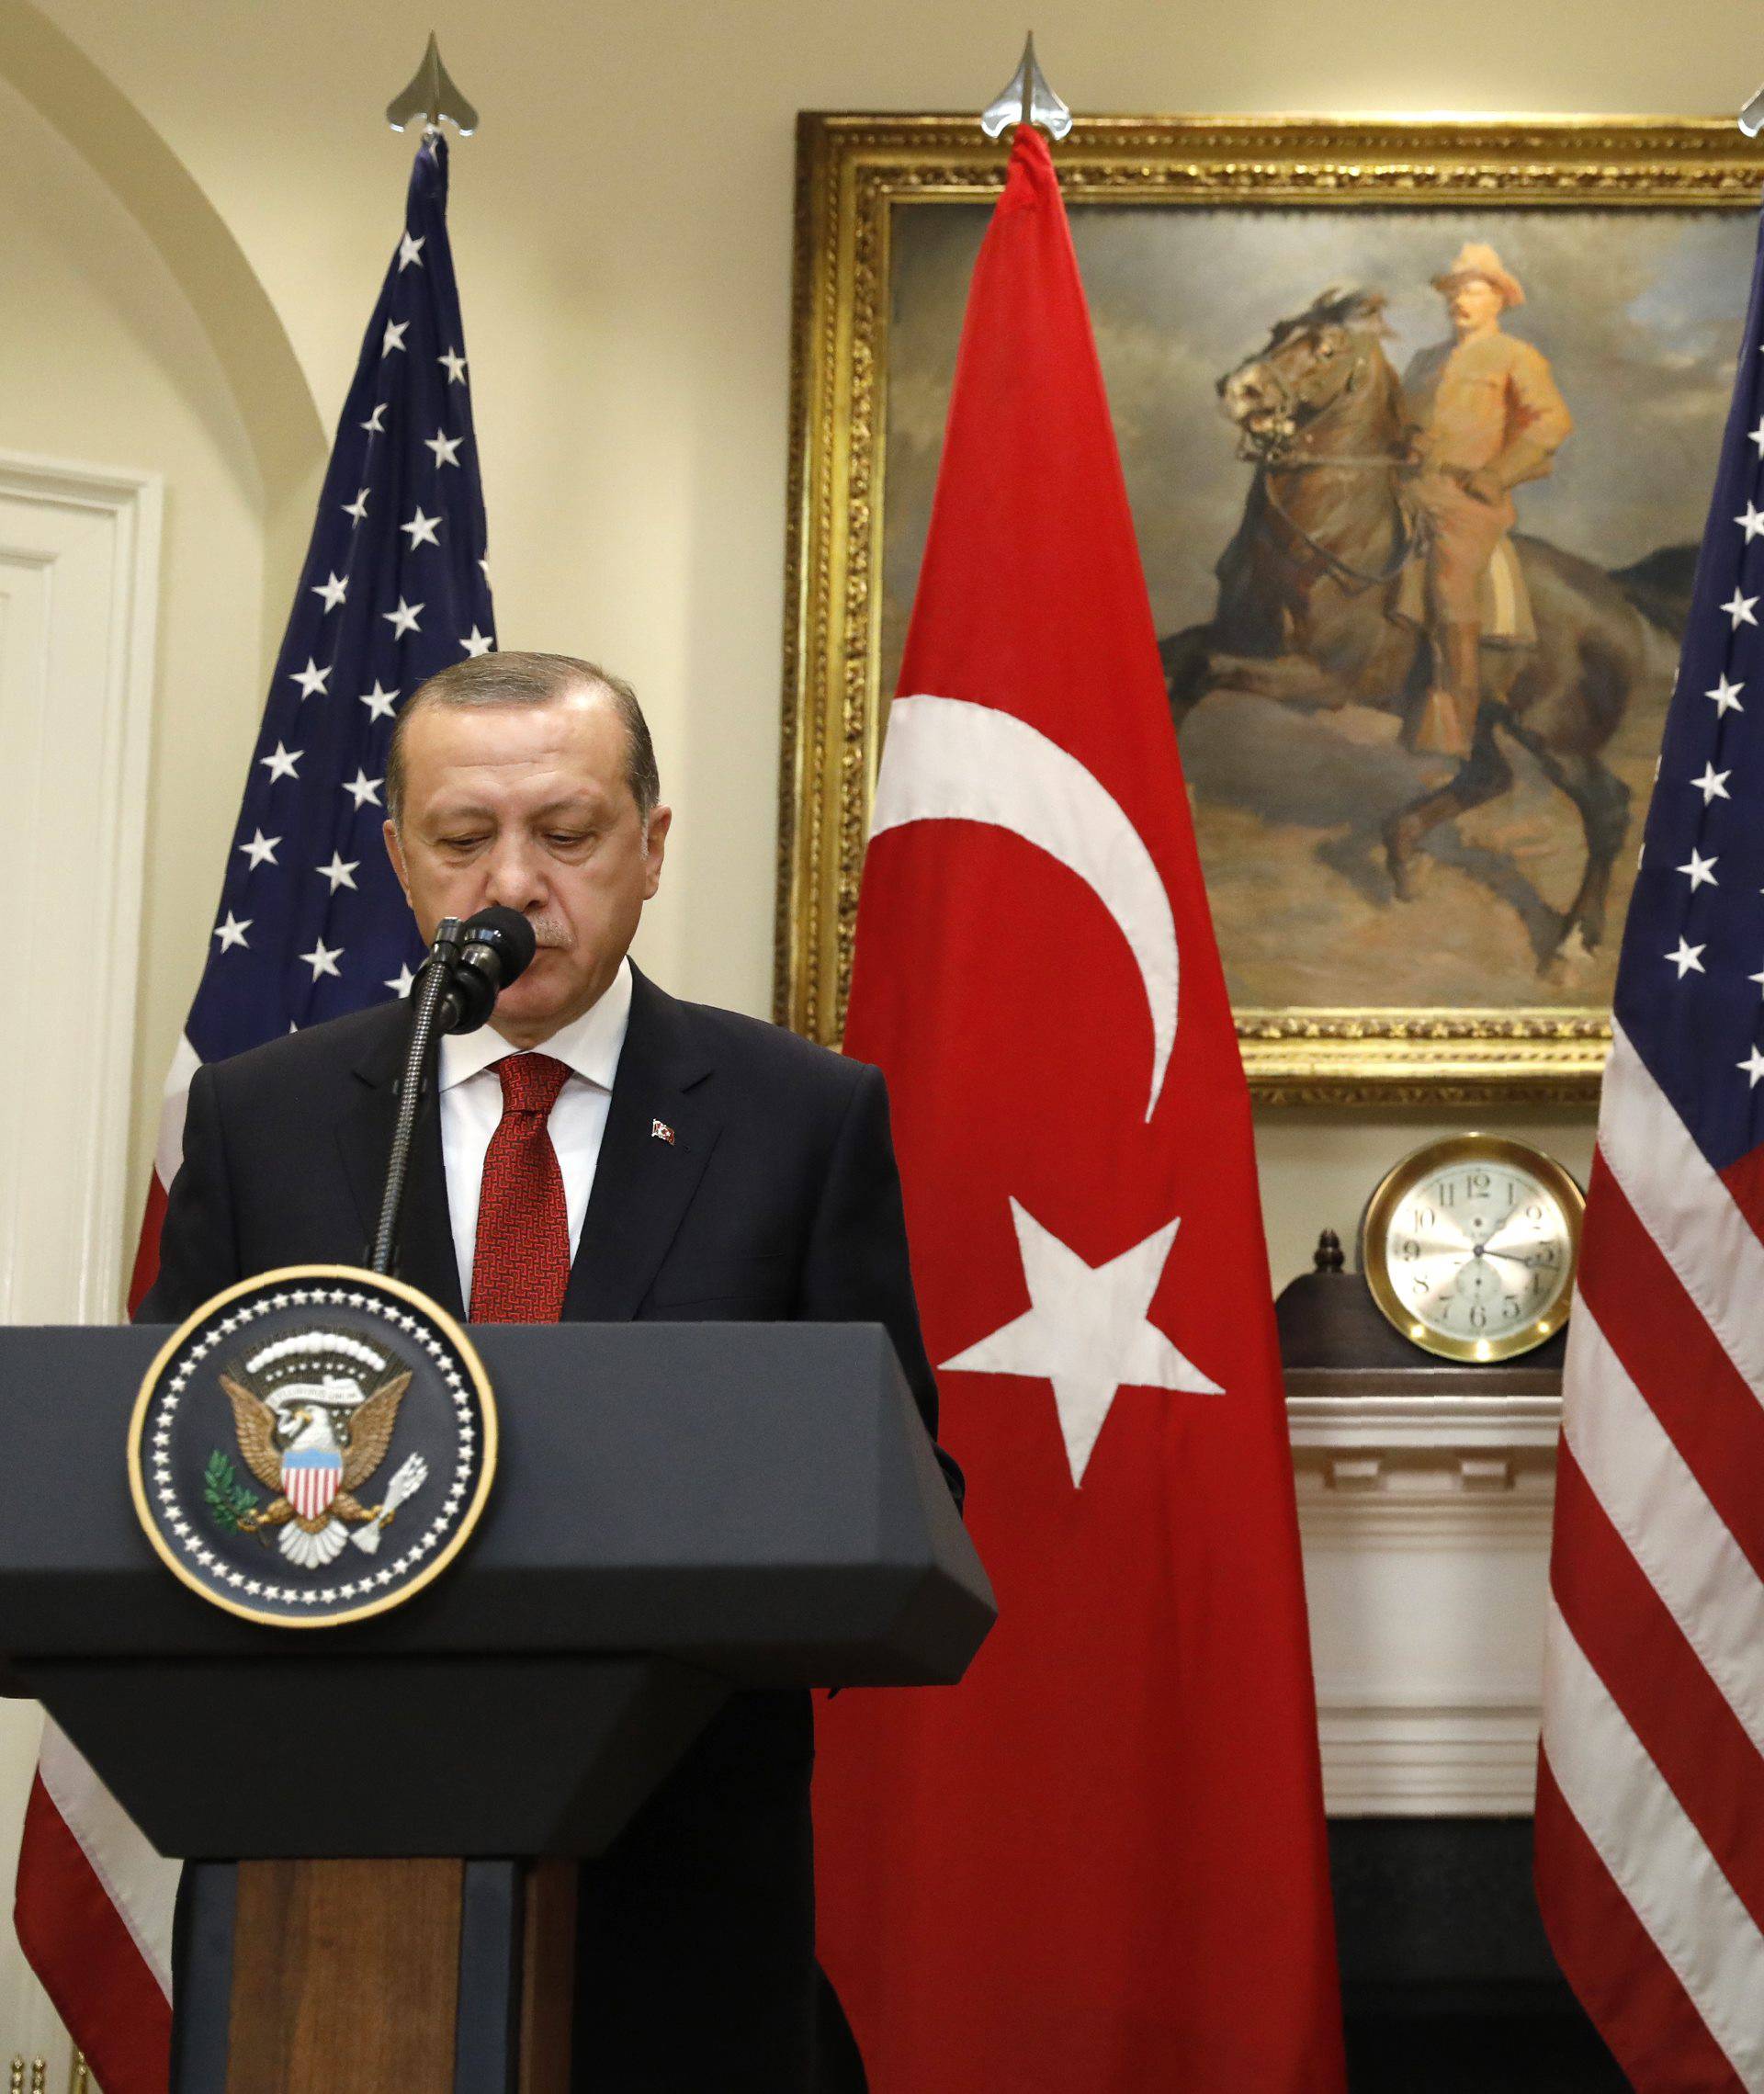 Turkey's President Erdogan and Trump deliver statements to reporters in the Roosevelt Room of the White House in Washington